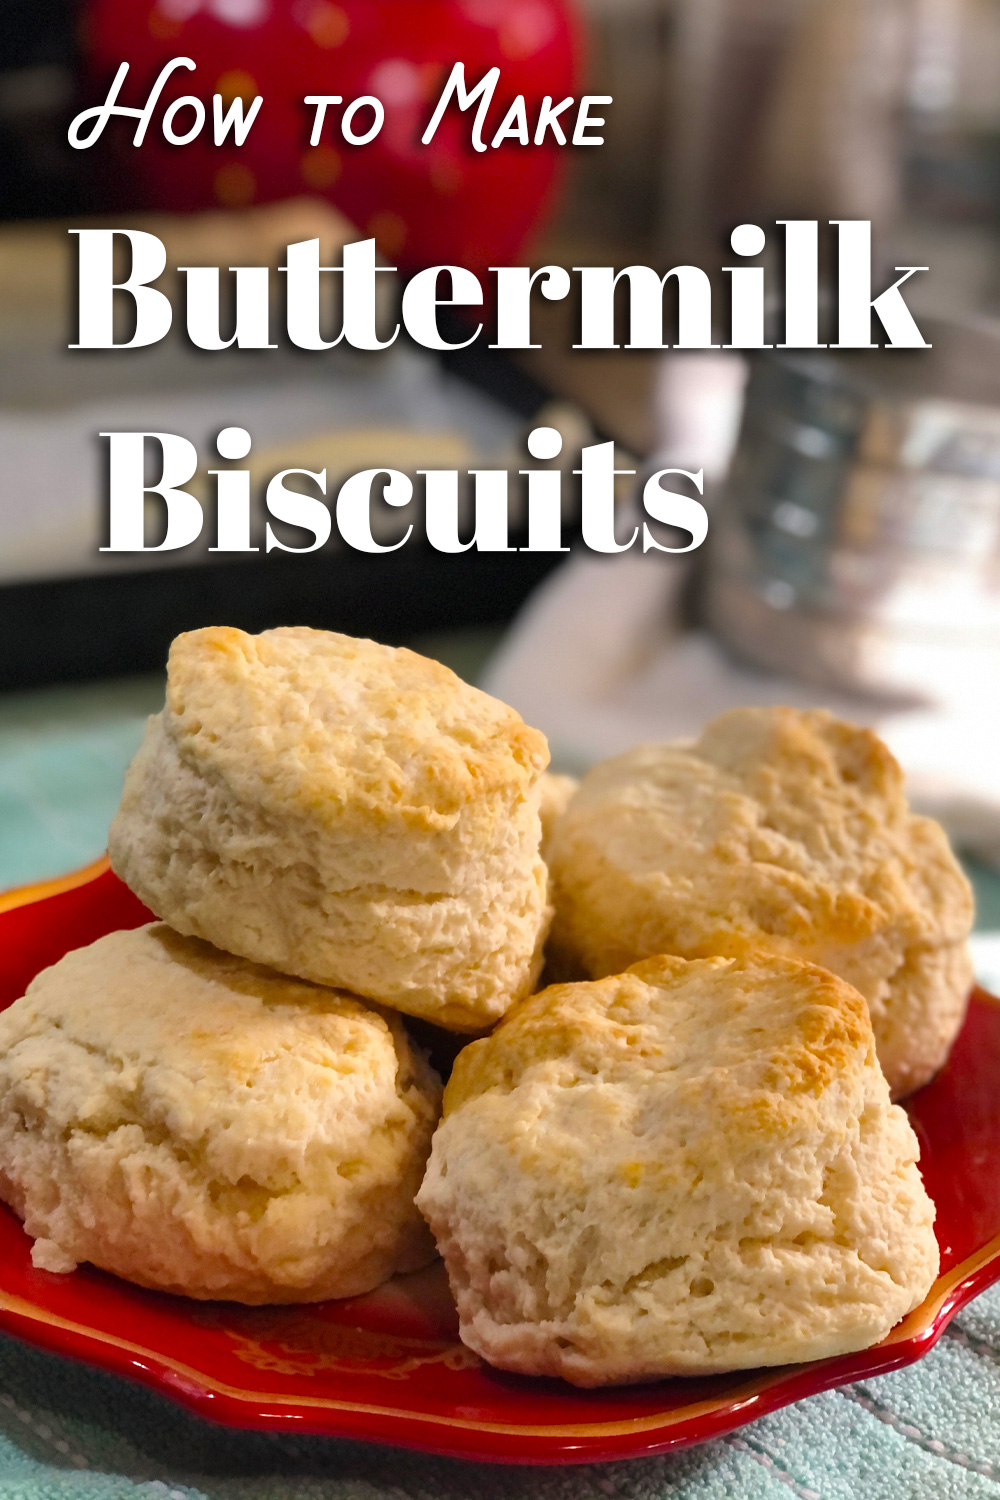 How to Make Buttermilk Biscuits